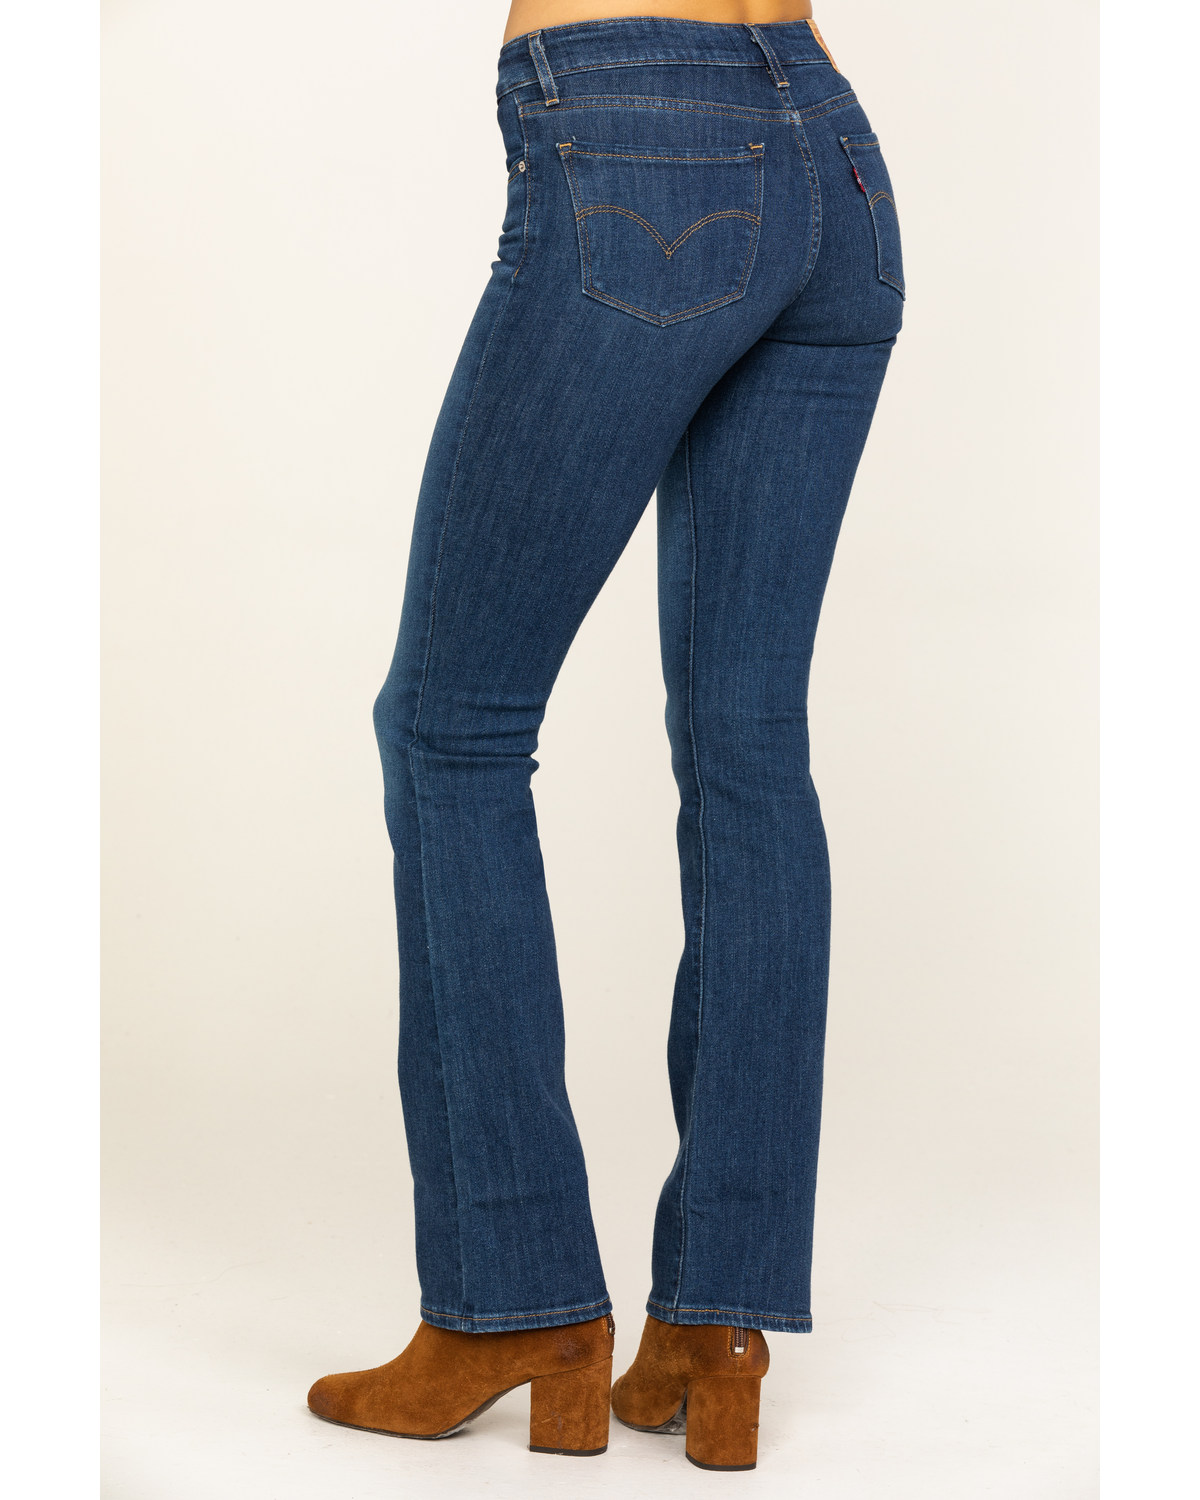 levi's 715 bootcut womens jeans 